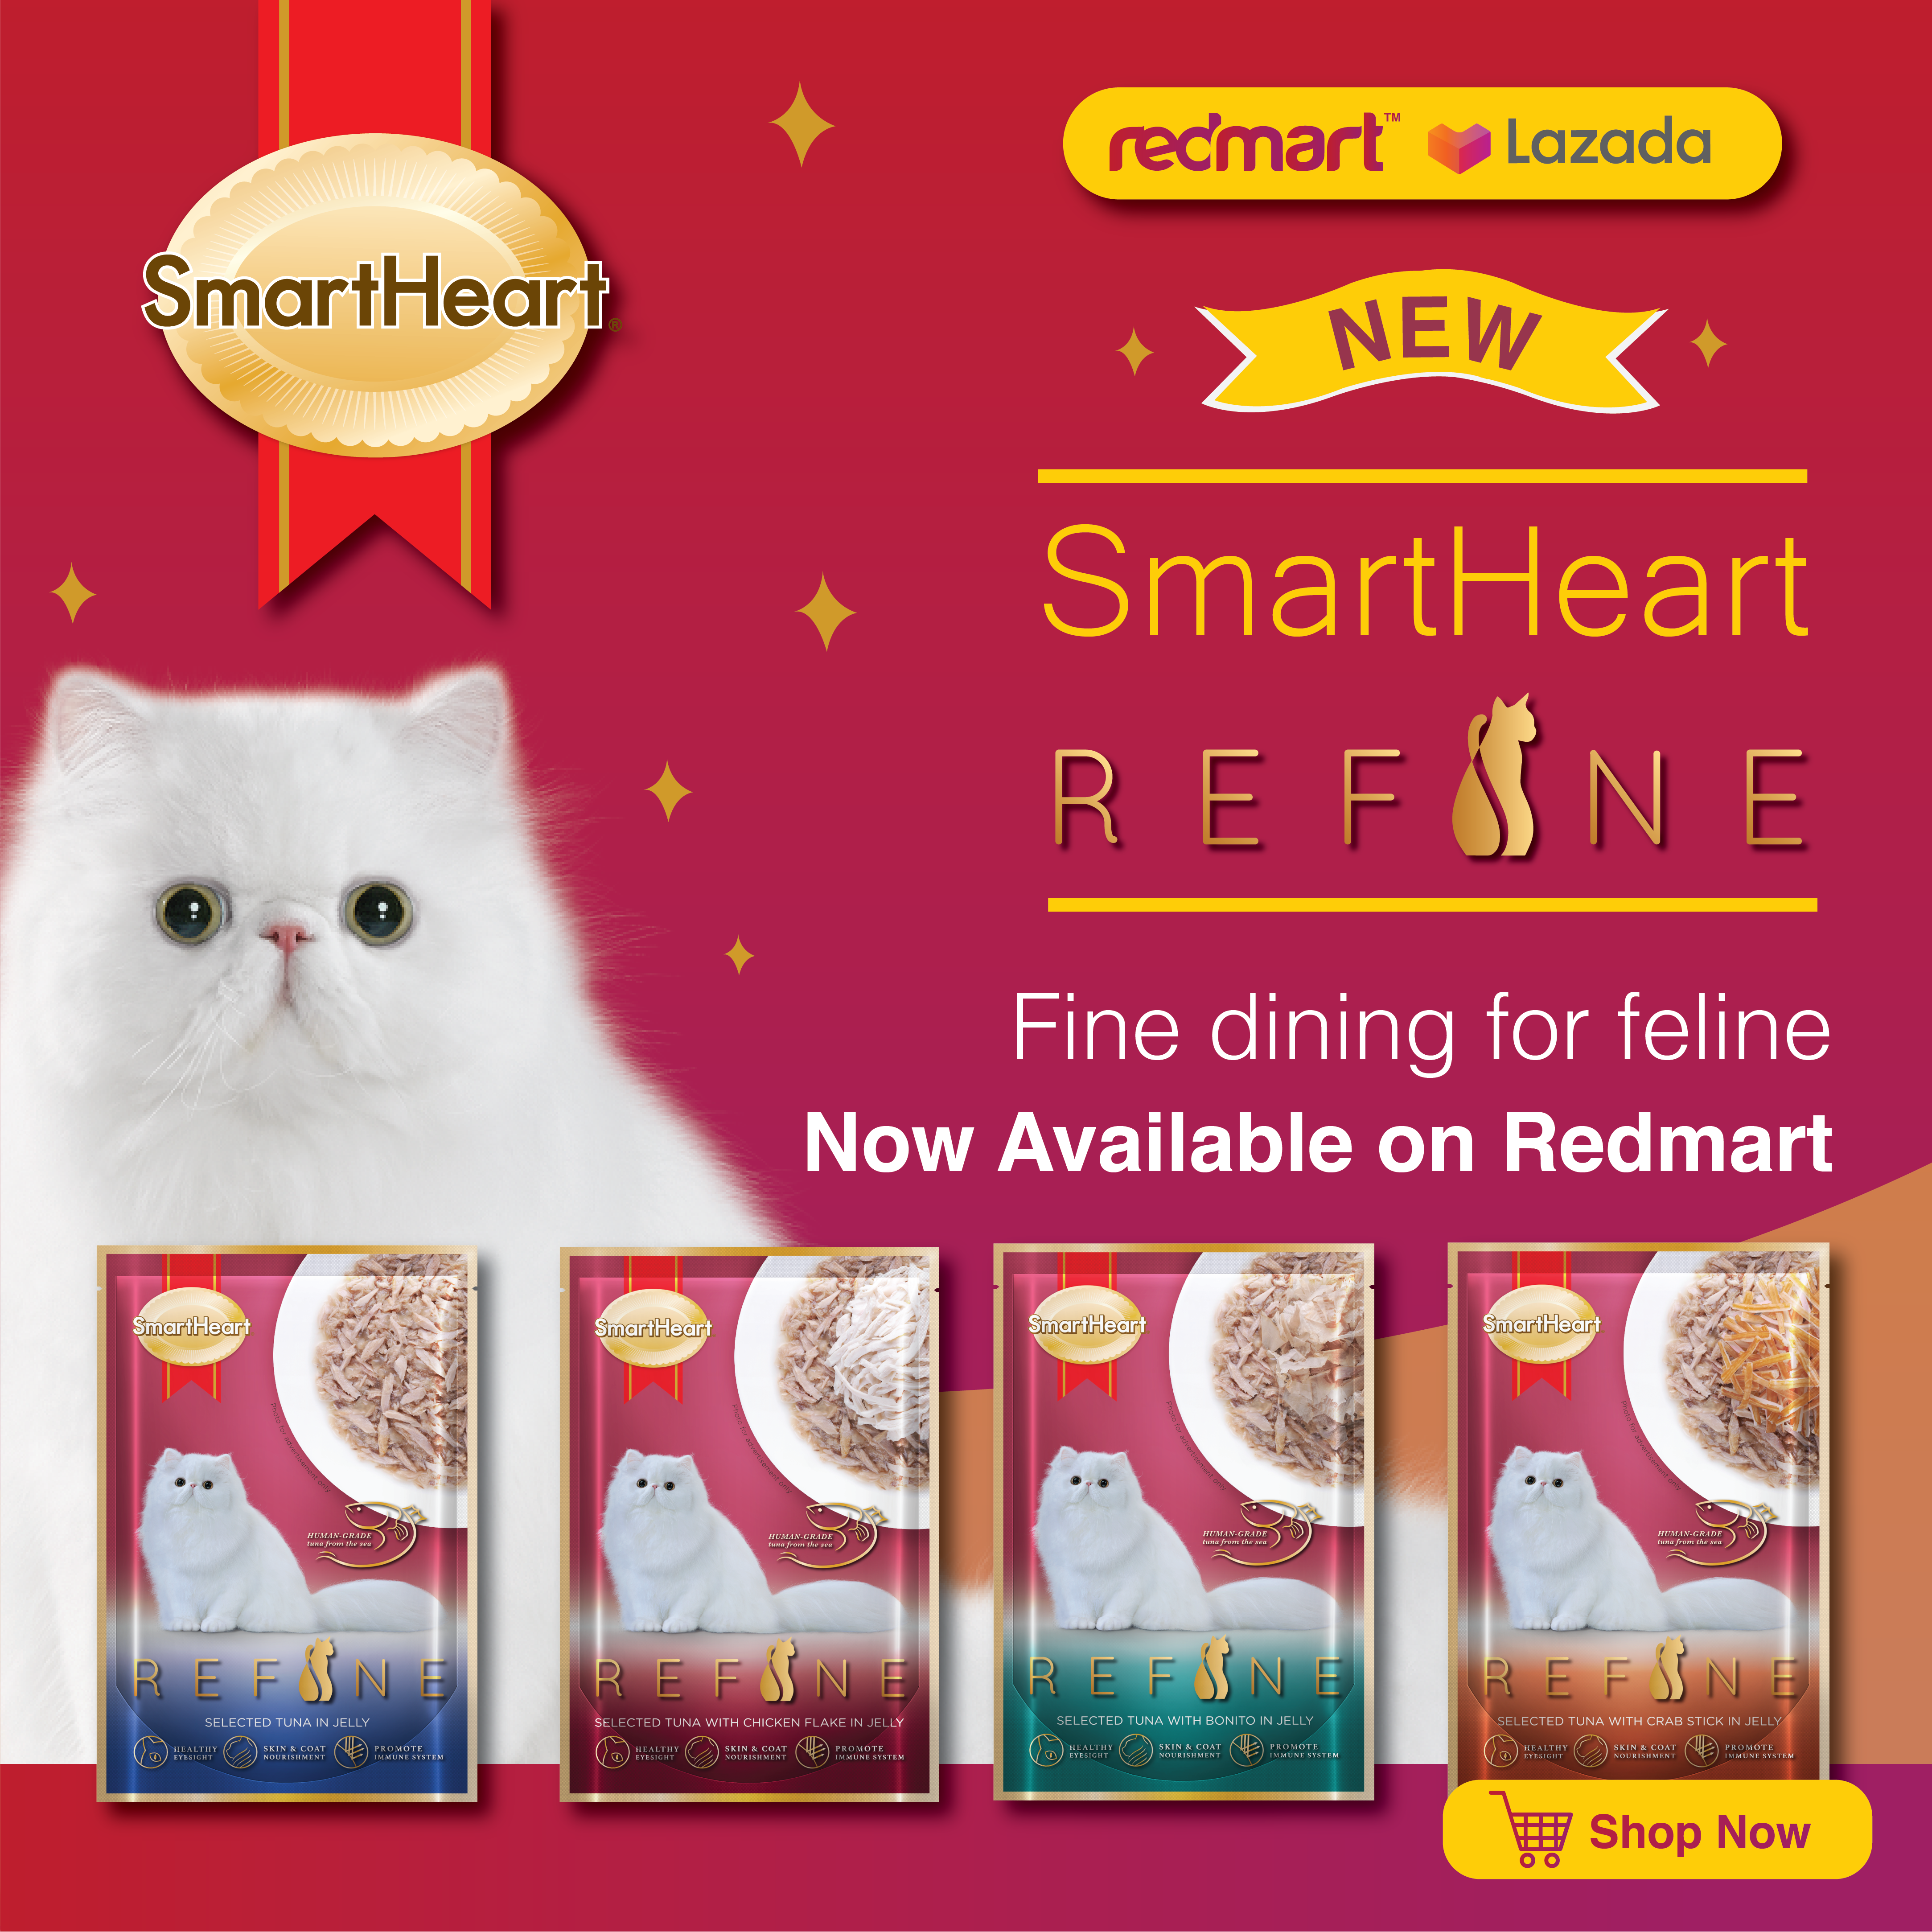 SmartHeart Refine is now available on Redmart